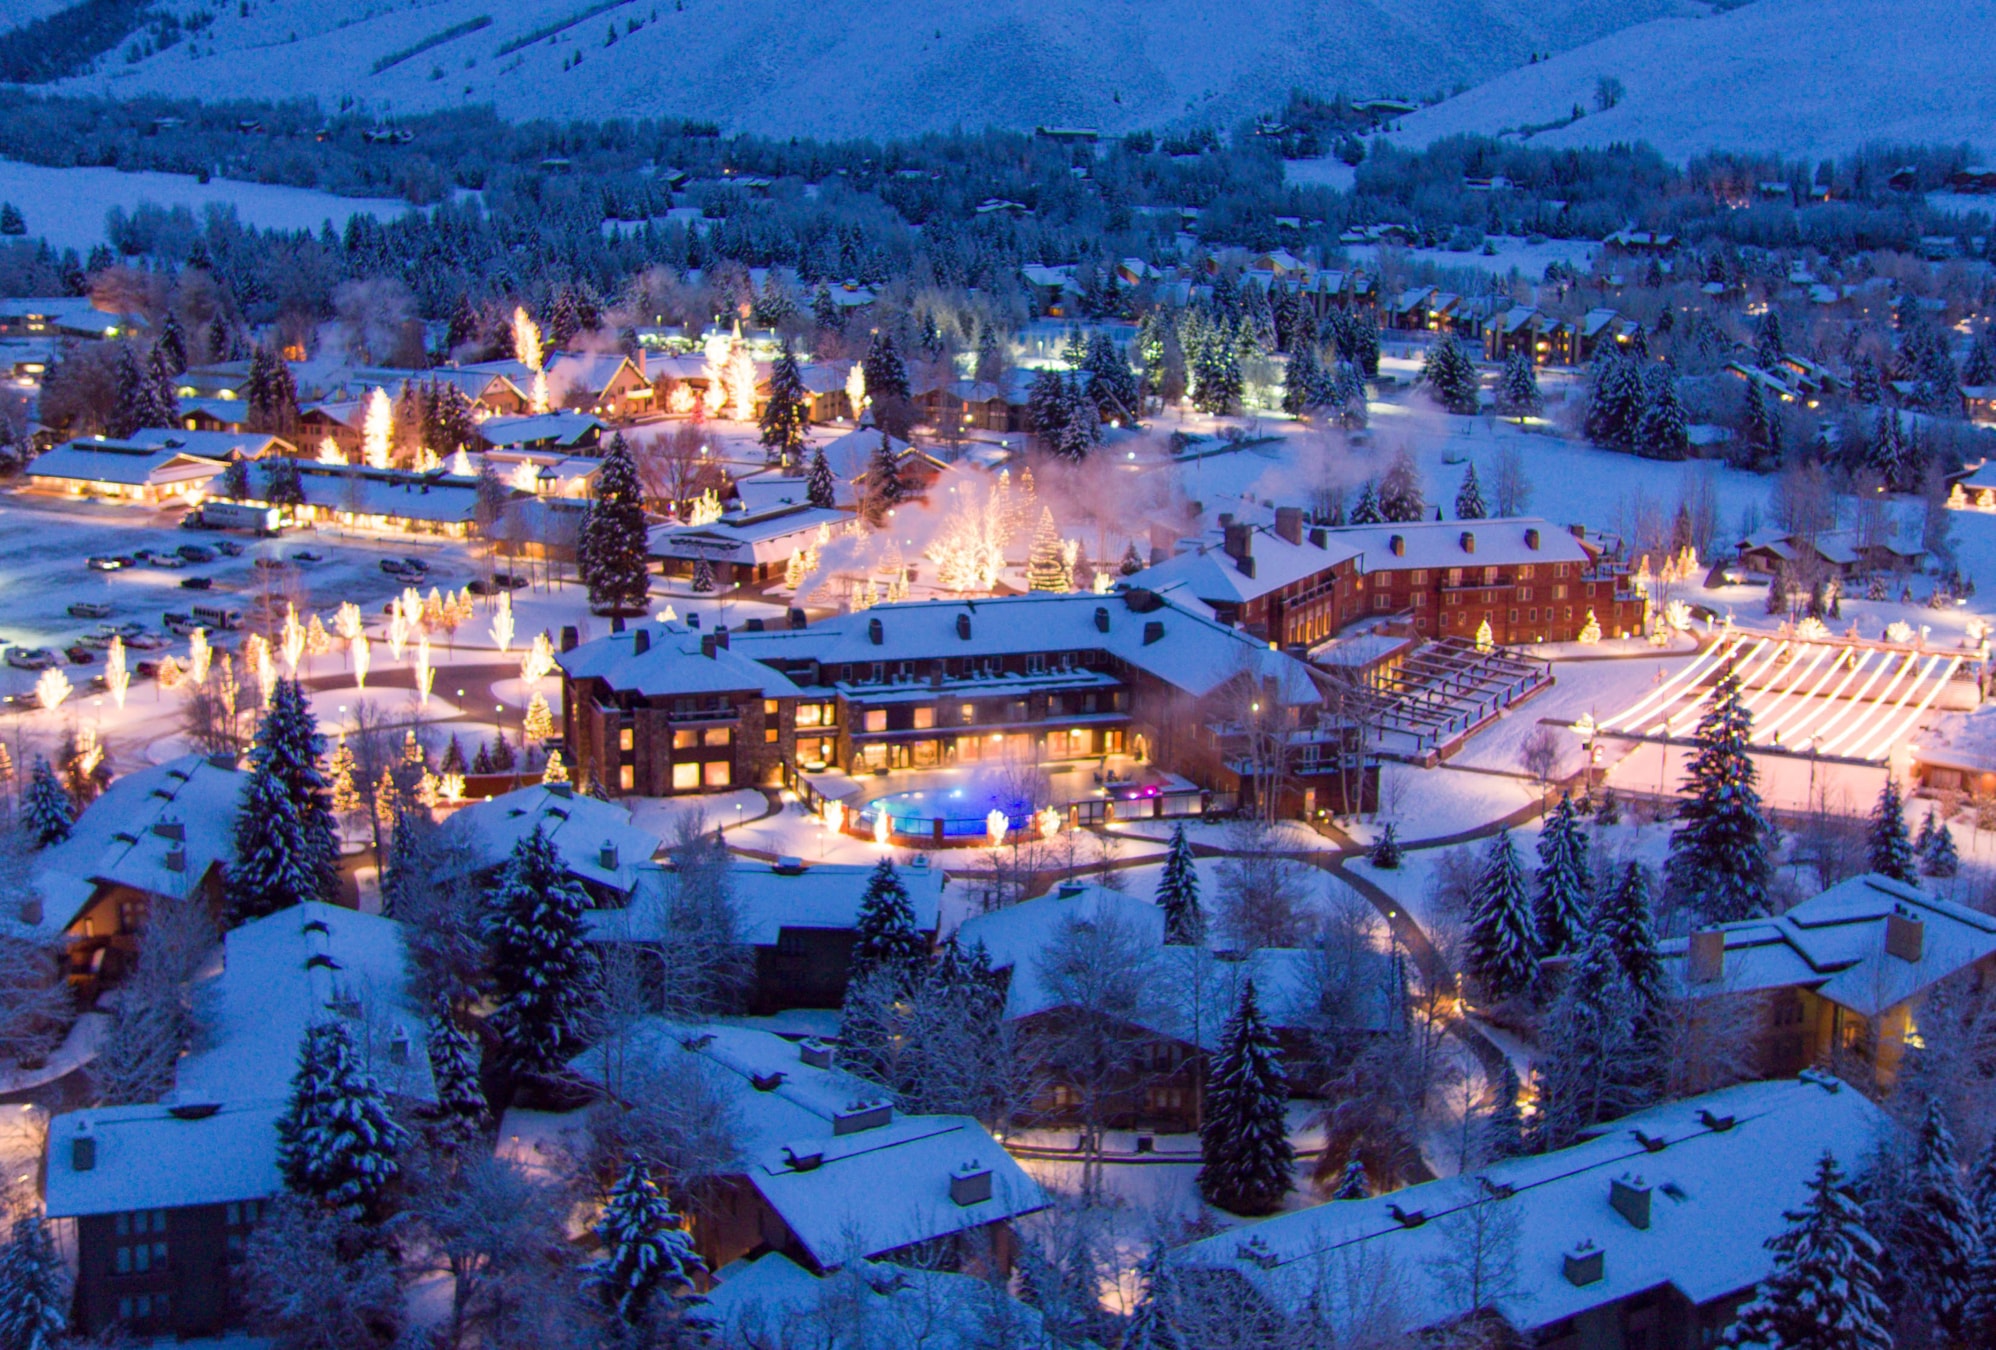 https://www.sunvalley.com/azure/sunvalley/media/sunvalley/lodging/the%20lodge/exterior/flyover-sun-valley-winter-0002.jpg?ext=.jpg?w=2400&h=1350&mode=crop&scale=both